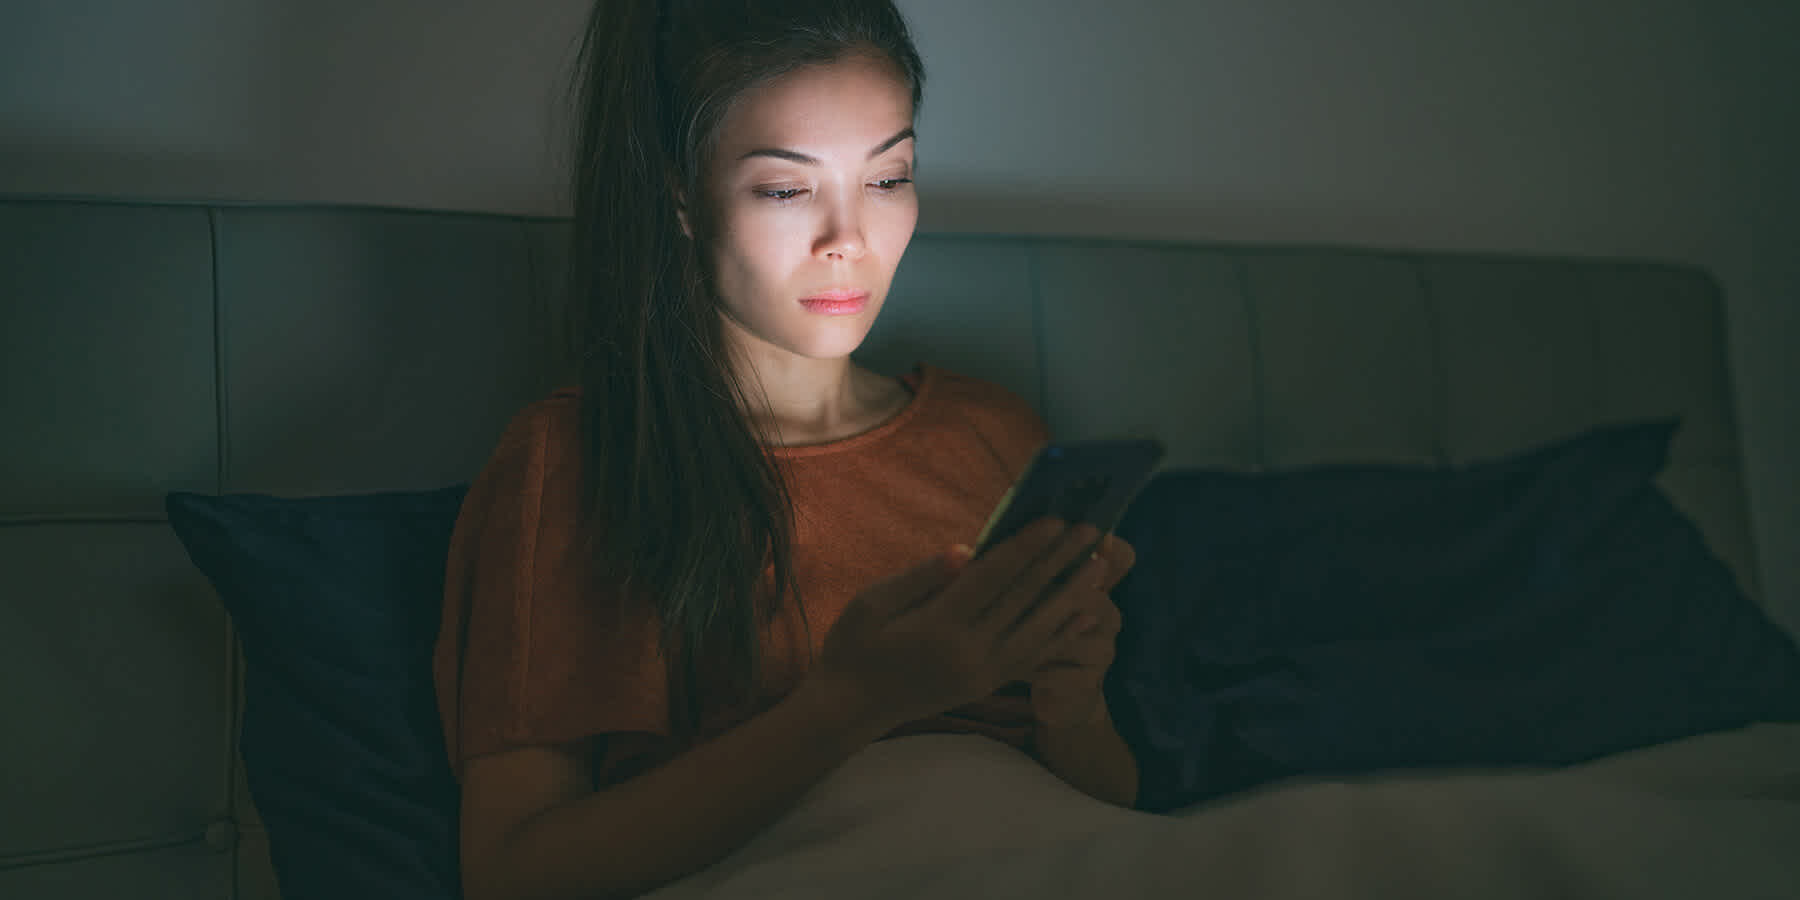 Woman browsing phone at night while experiencing perimenopause and insomnia